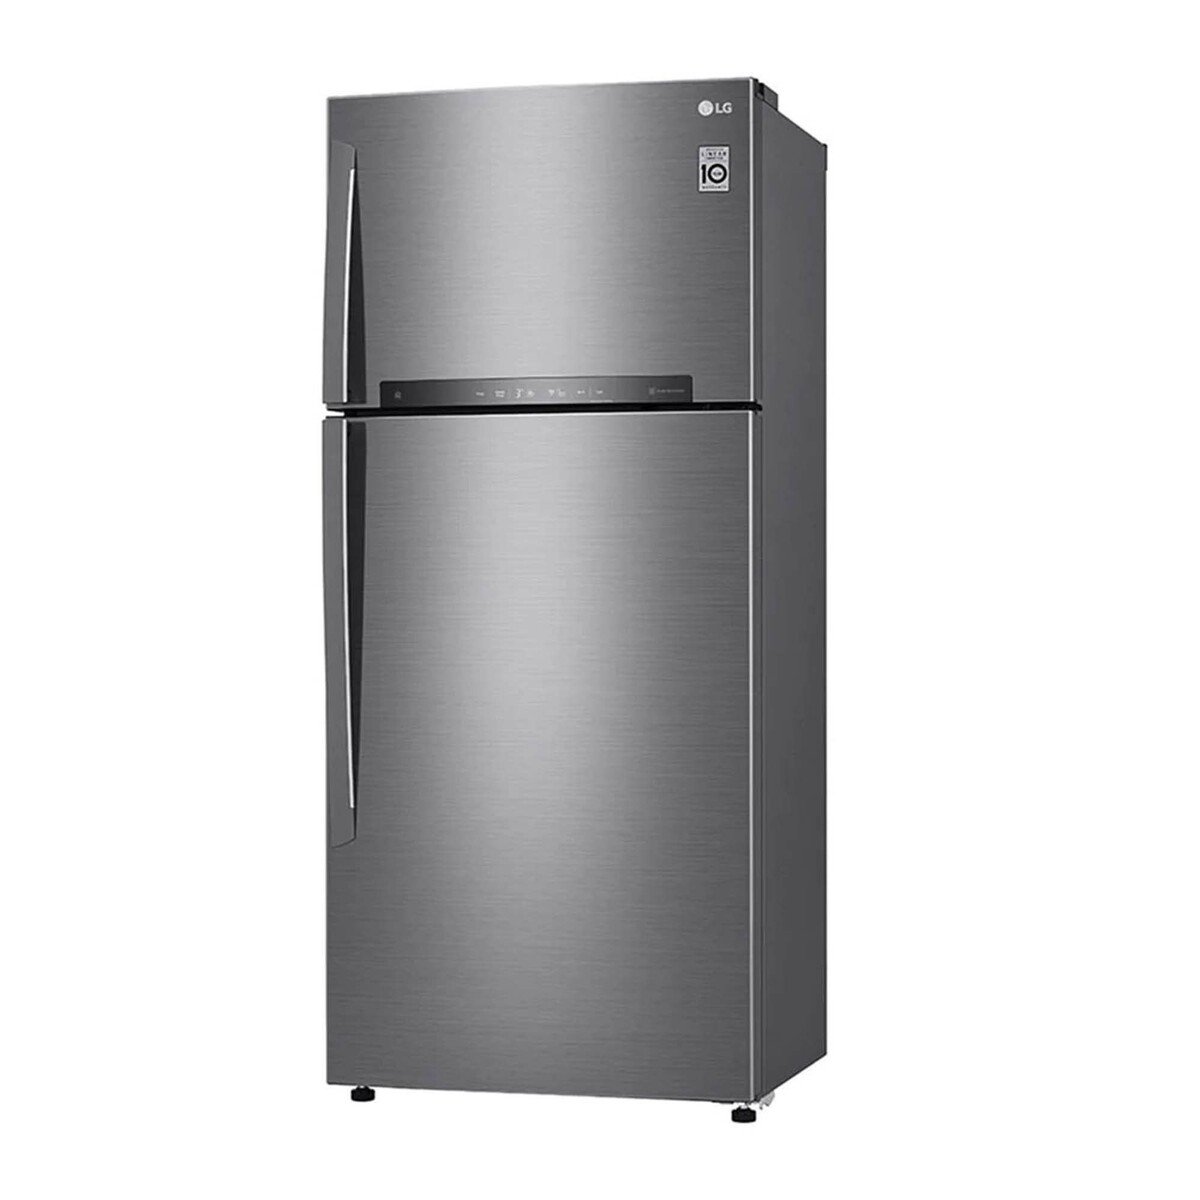 LG Double Door Refrigerator 630Ltr, LINEAR Cooling™, Hygiene FRESH+™, ThinQ™, Platinum Silver, GR-H832HLH